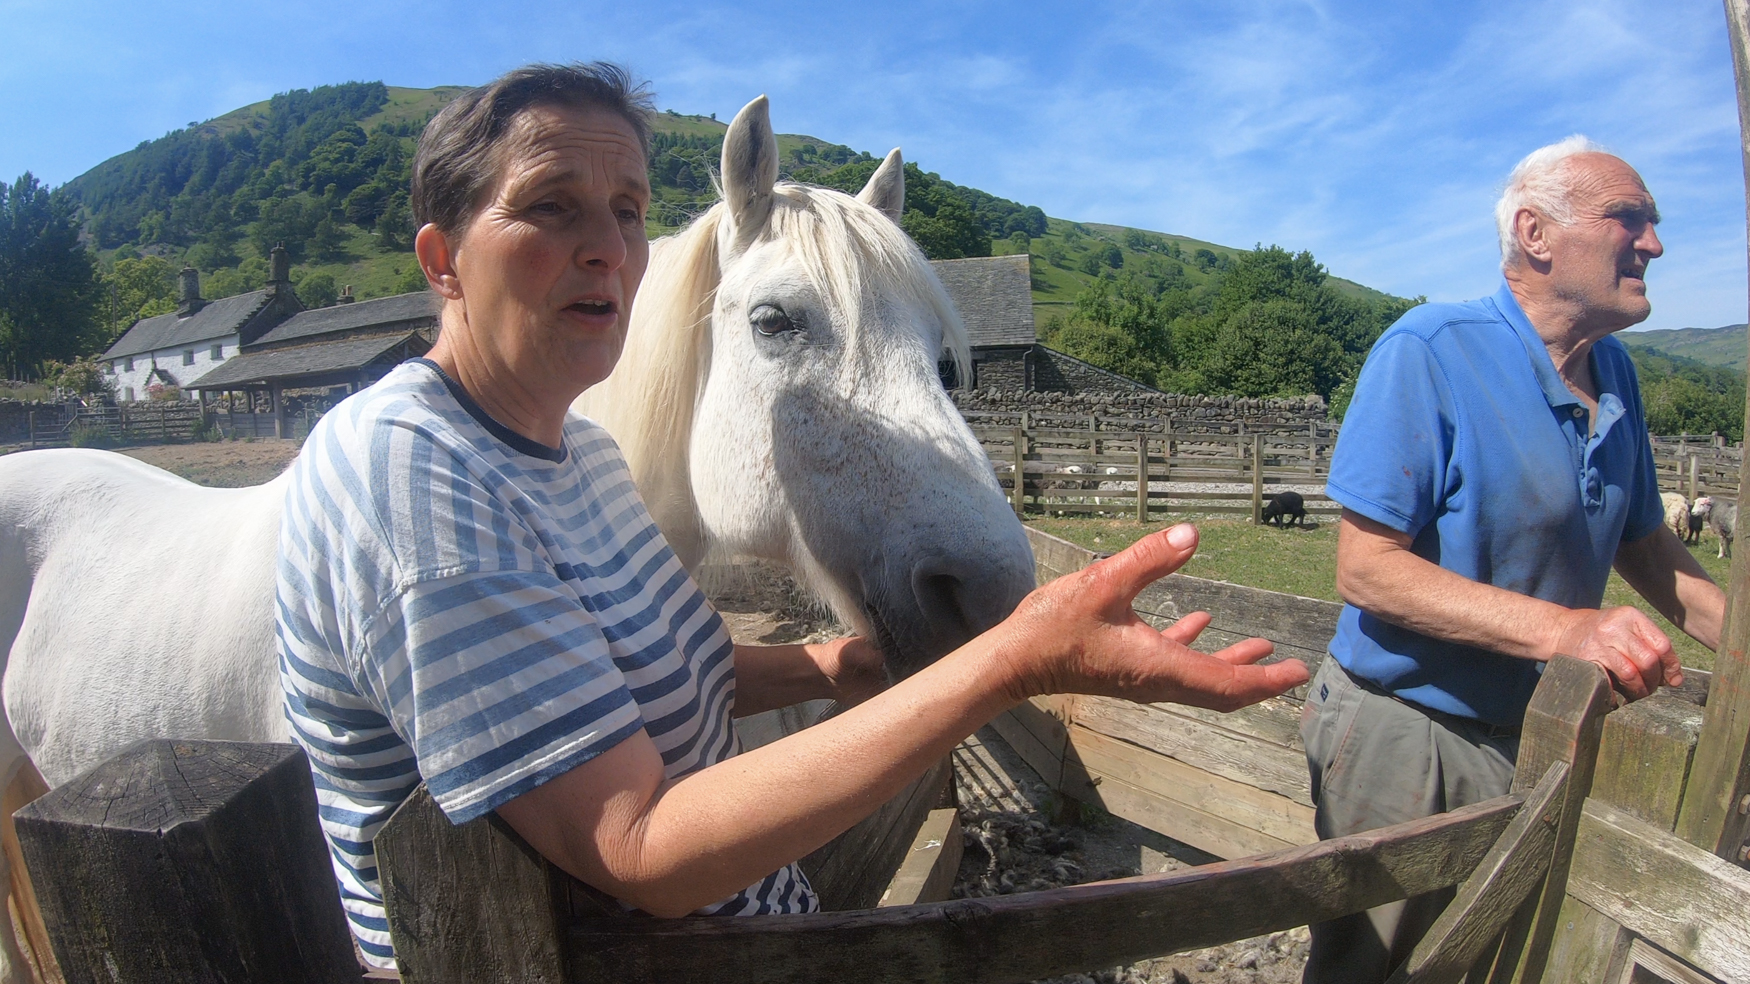 A woman gestures while talking, one hand outstretched, the other resting on a white horse. A man leans on the fence to the right of the image.